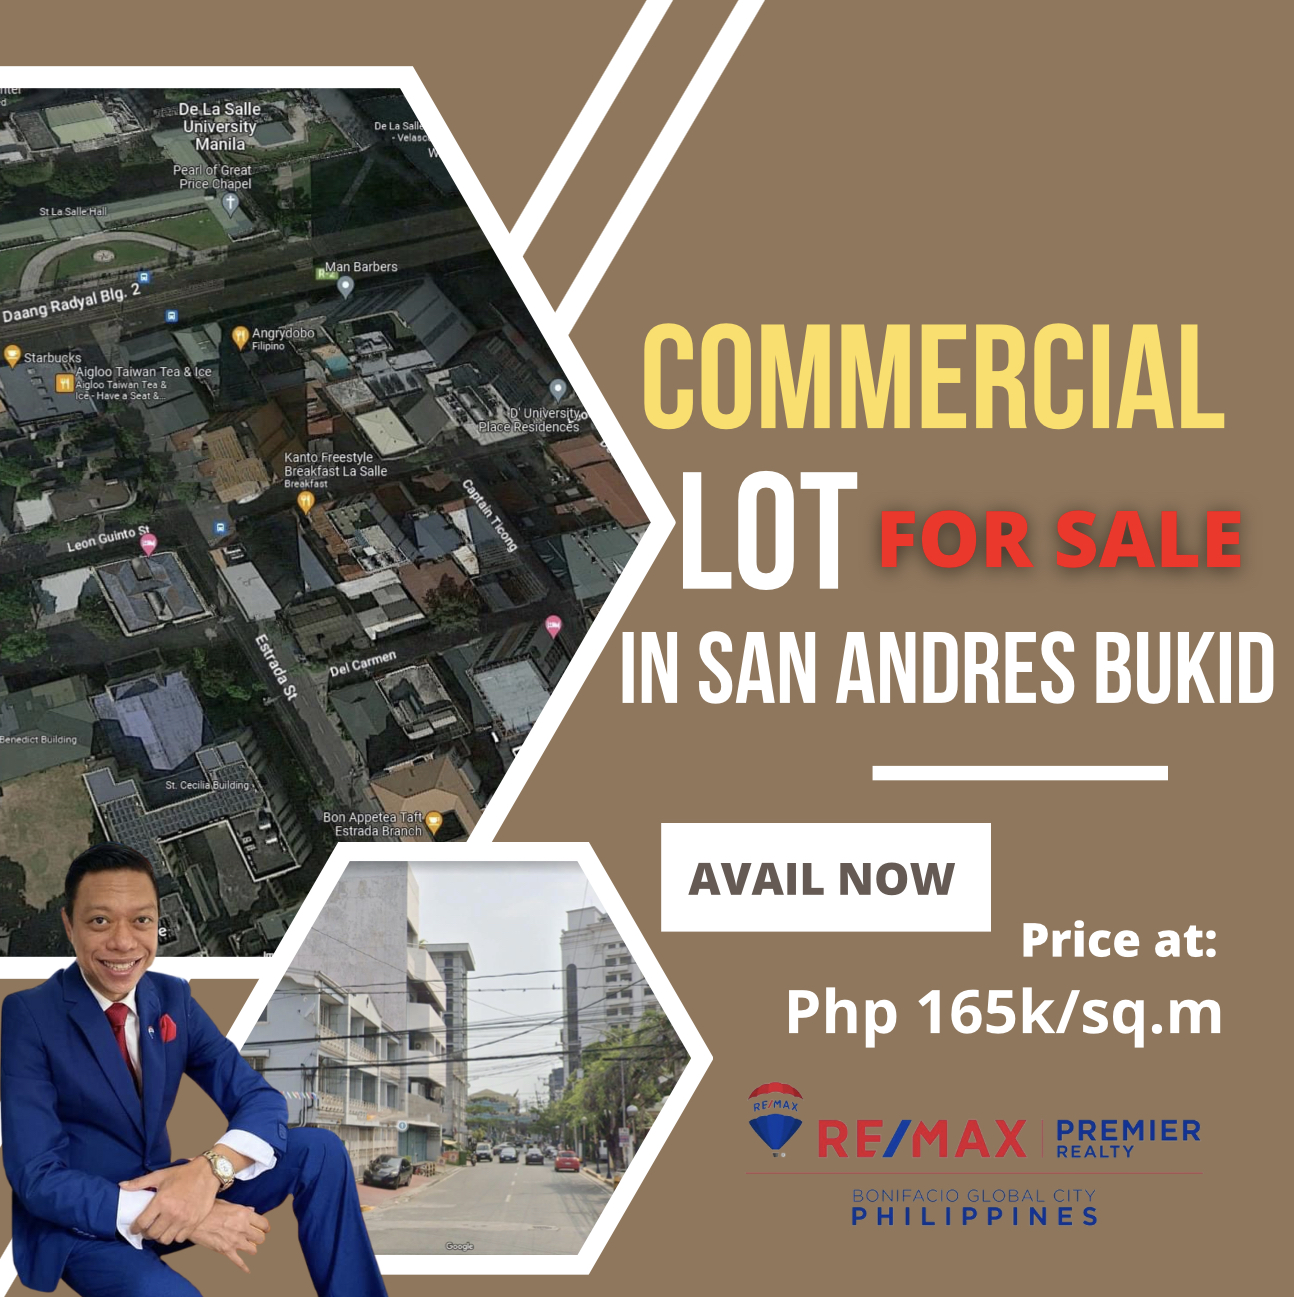 COMMERCIAL LOT FOR SALE in San Andres Bukid‼️